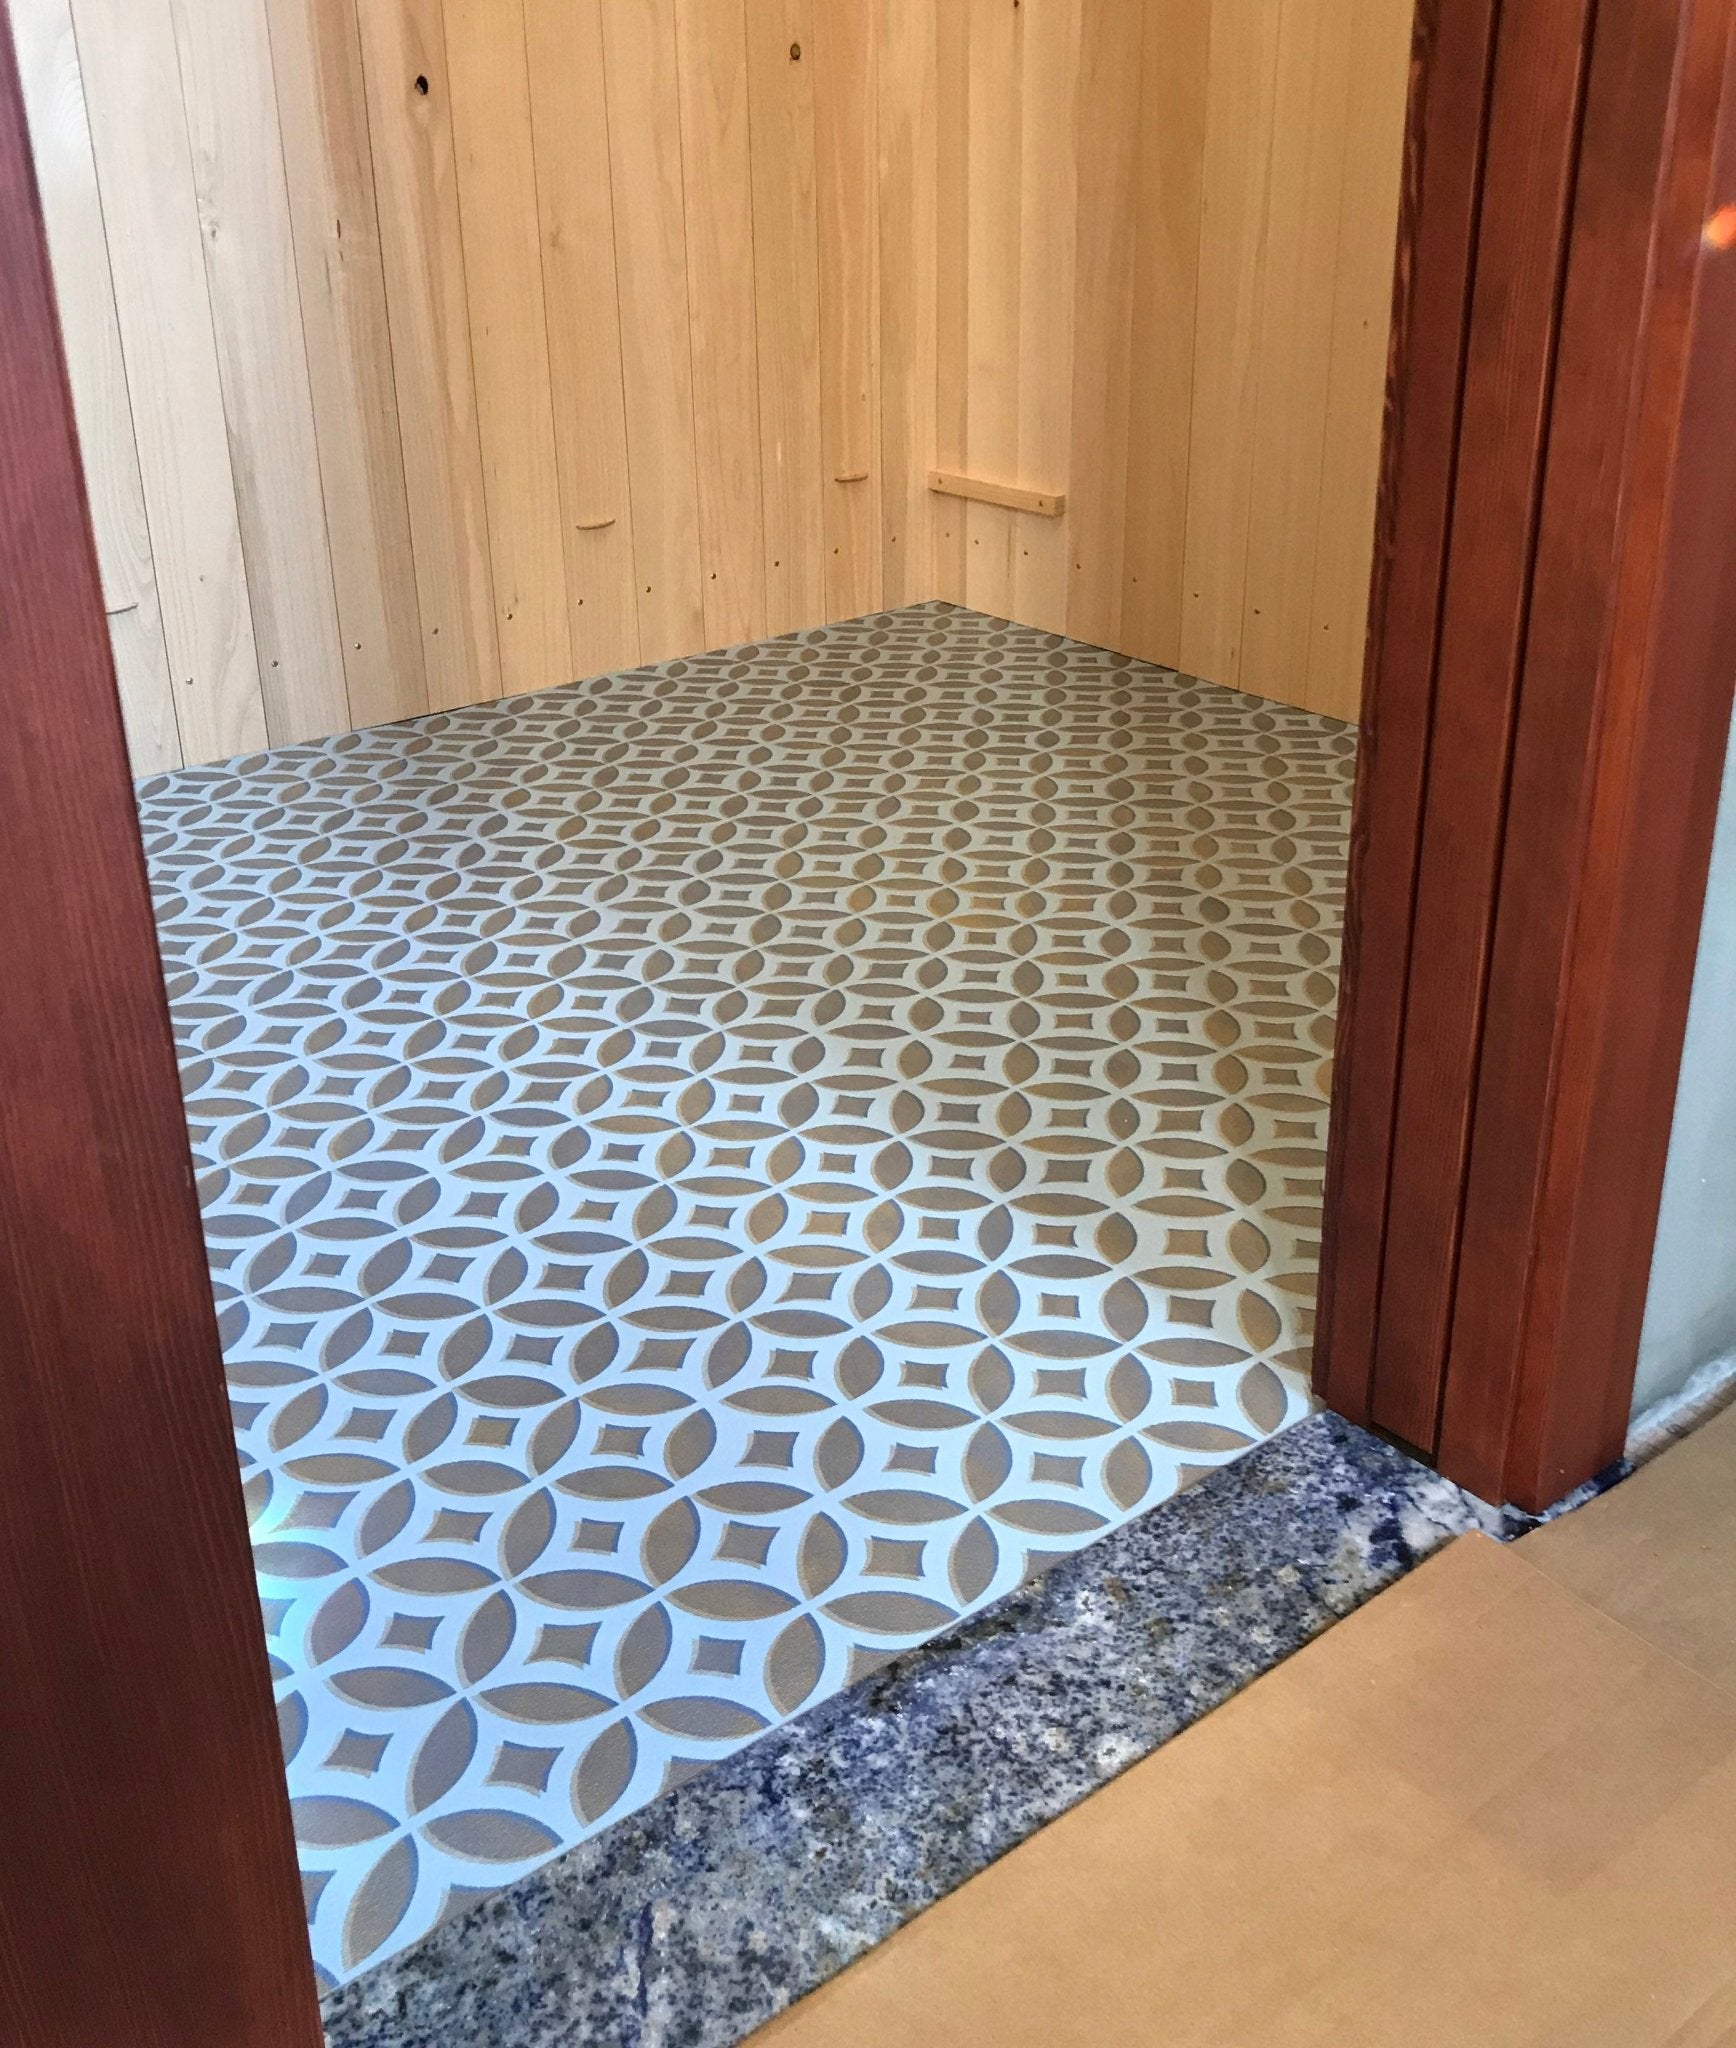 In-situ image of this floorcloth, installed wall-to-wall in a walk in closet.